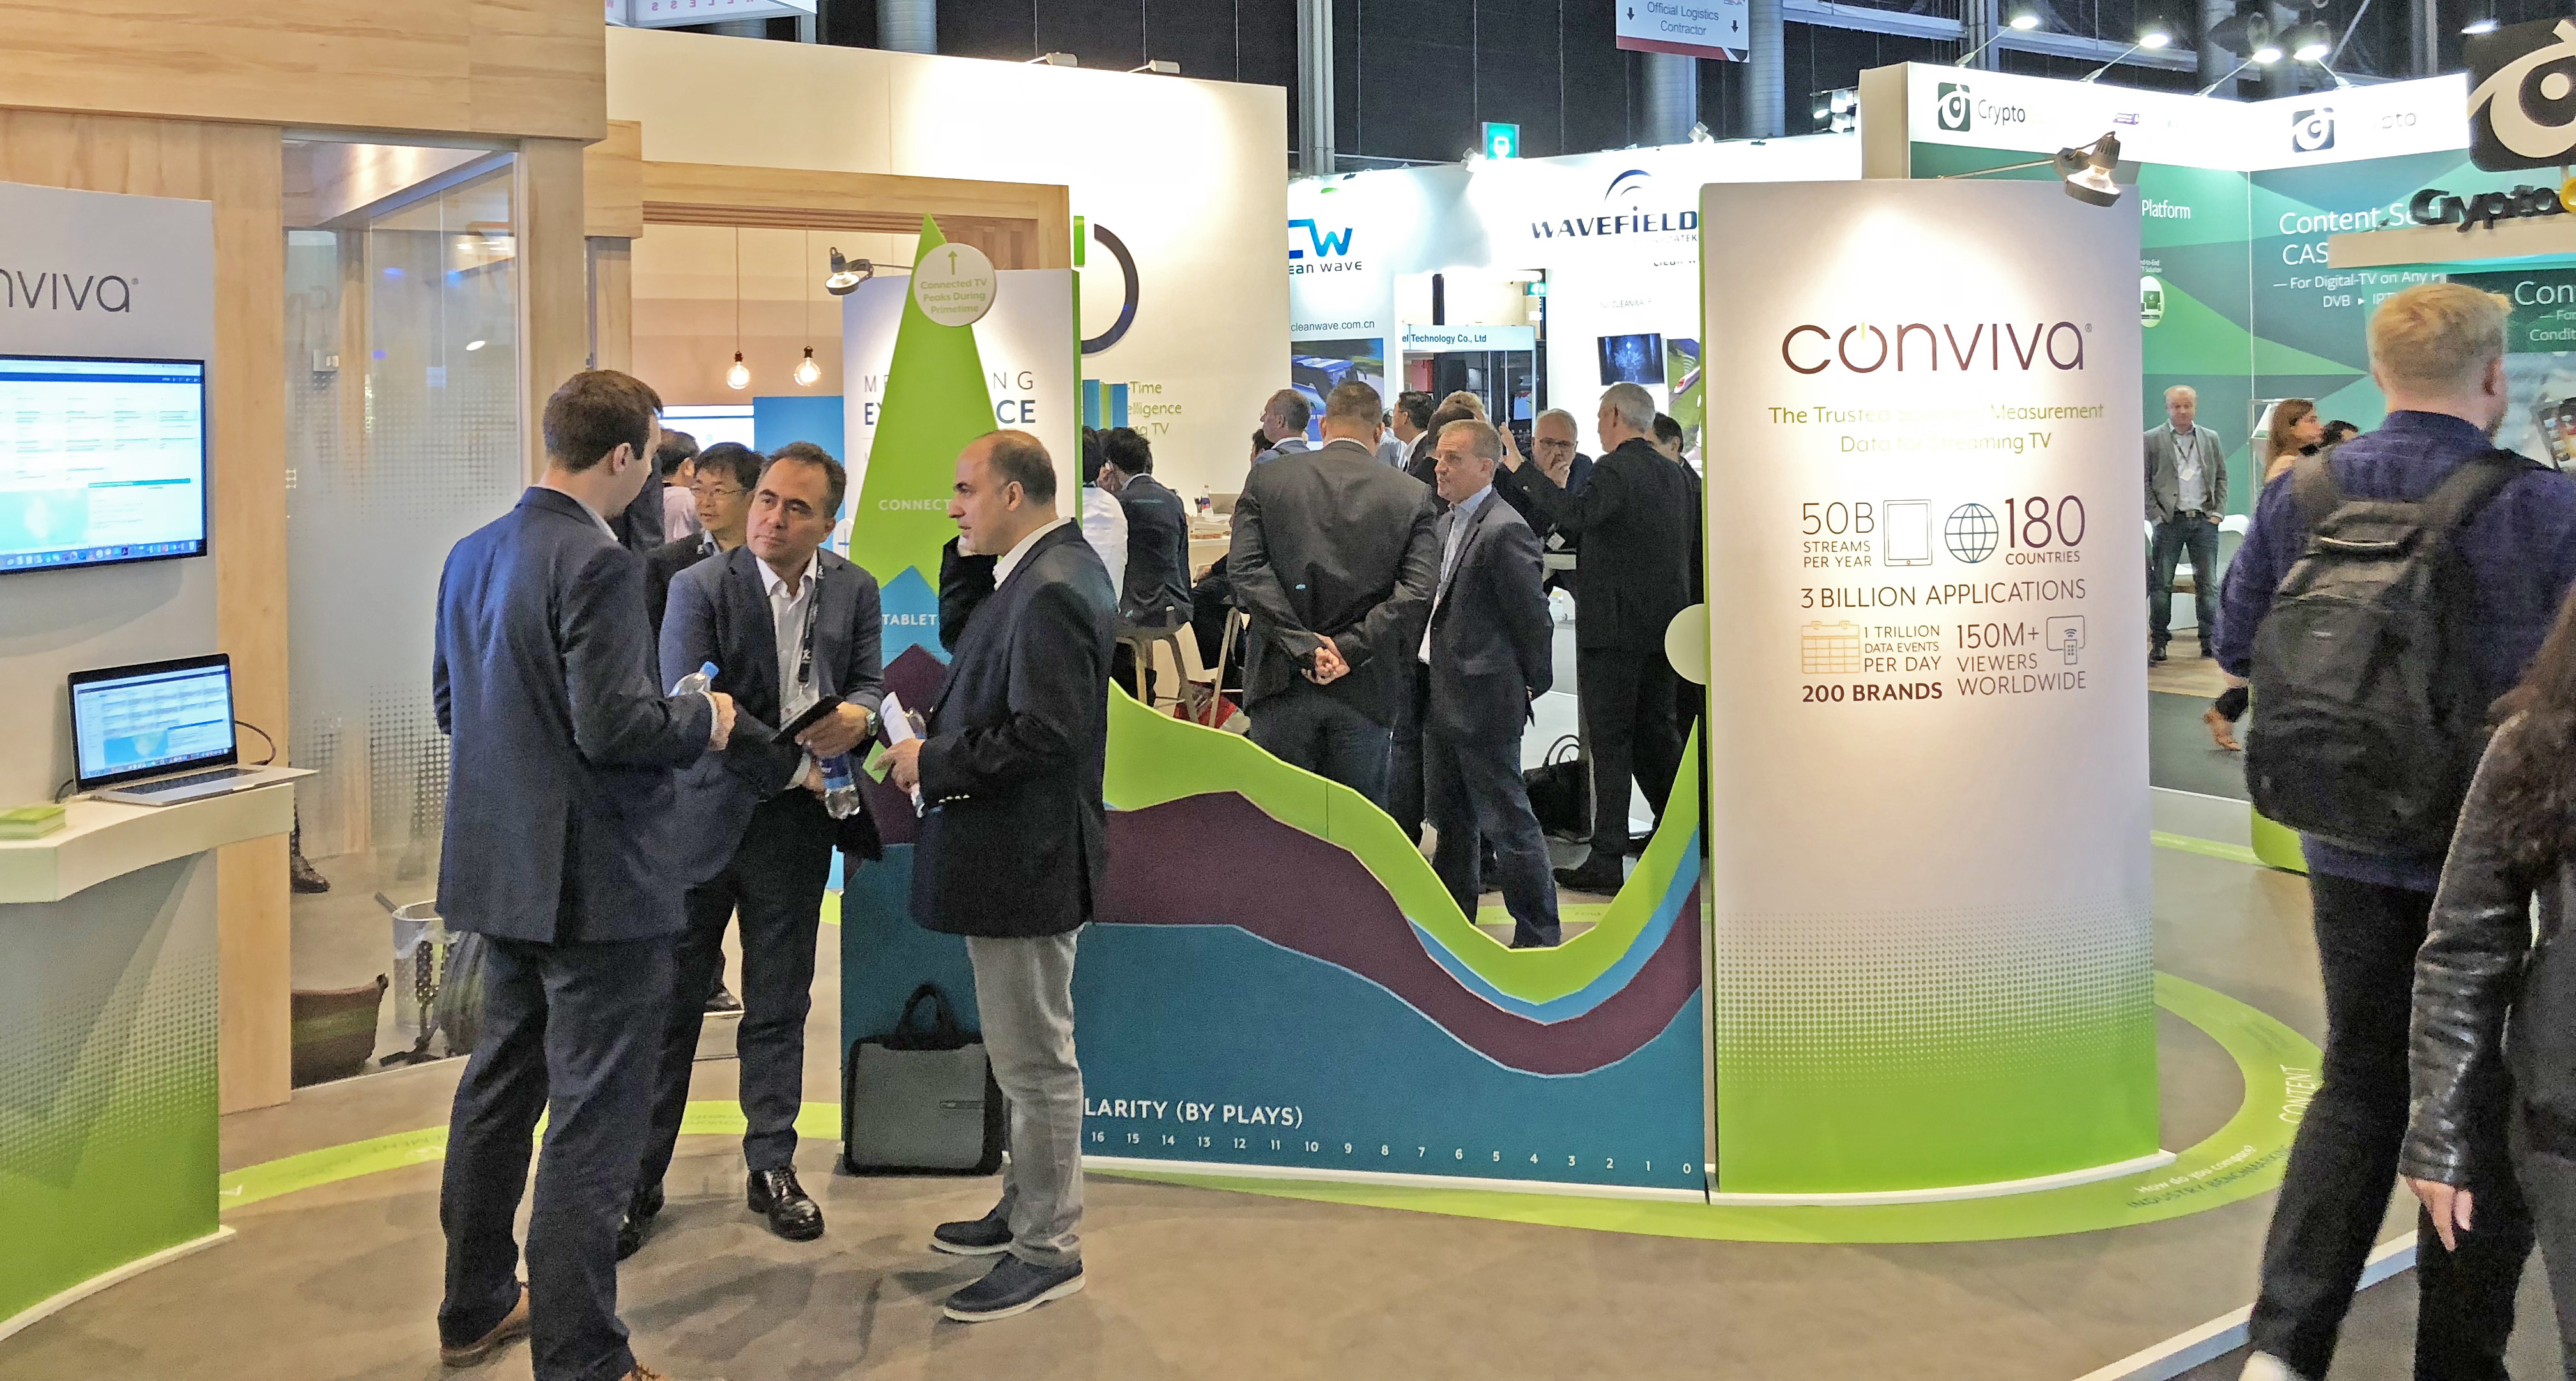 Conviva's Team Interacting With Other Event Participants At IBC 2018